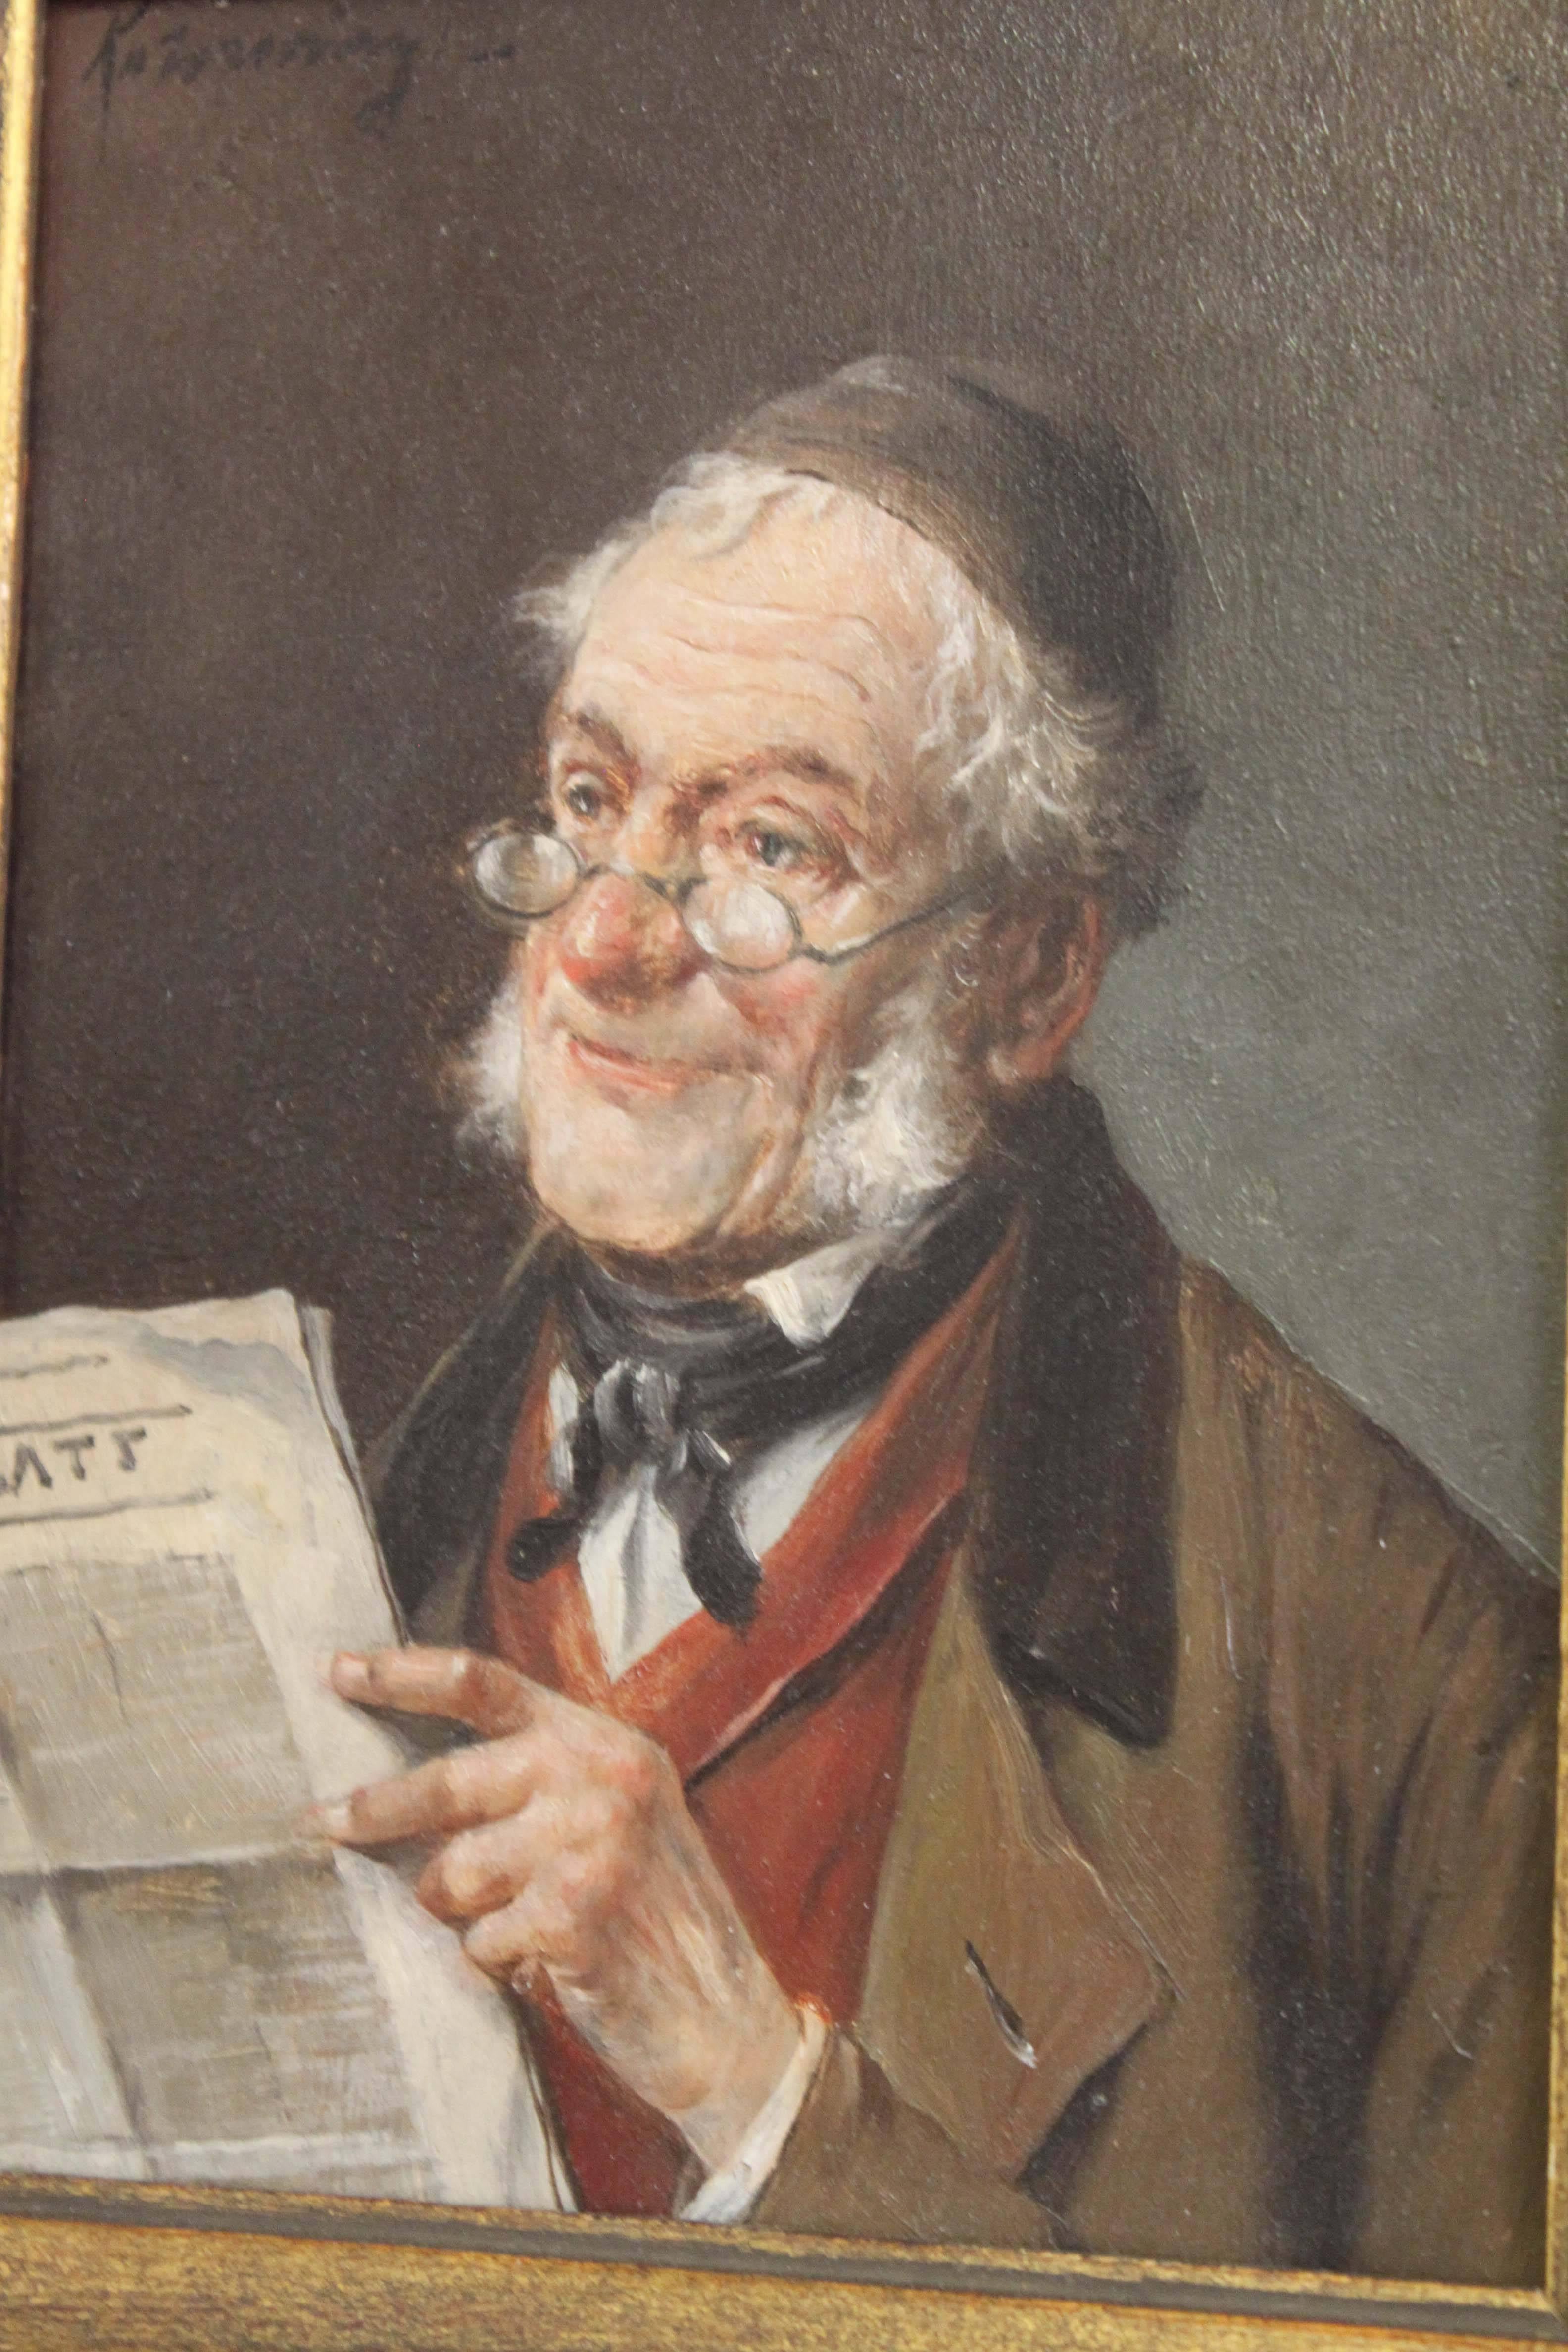 A fine quality European oil painting of a gentleman reading the newspaper. The paper appears to be of German origin. The painting is on panel and measures 8.5? x 6?, overall dimensions are 11? x 10?. Lajos Kolozsváry was a Hungarian painter whose